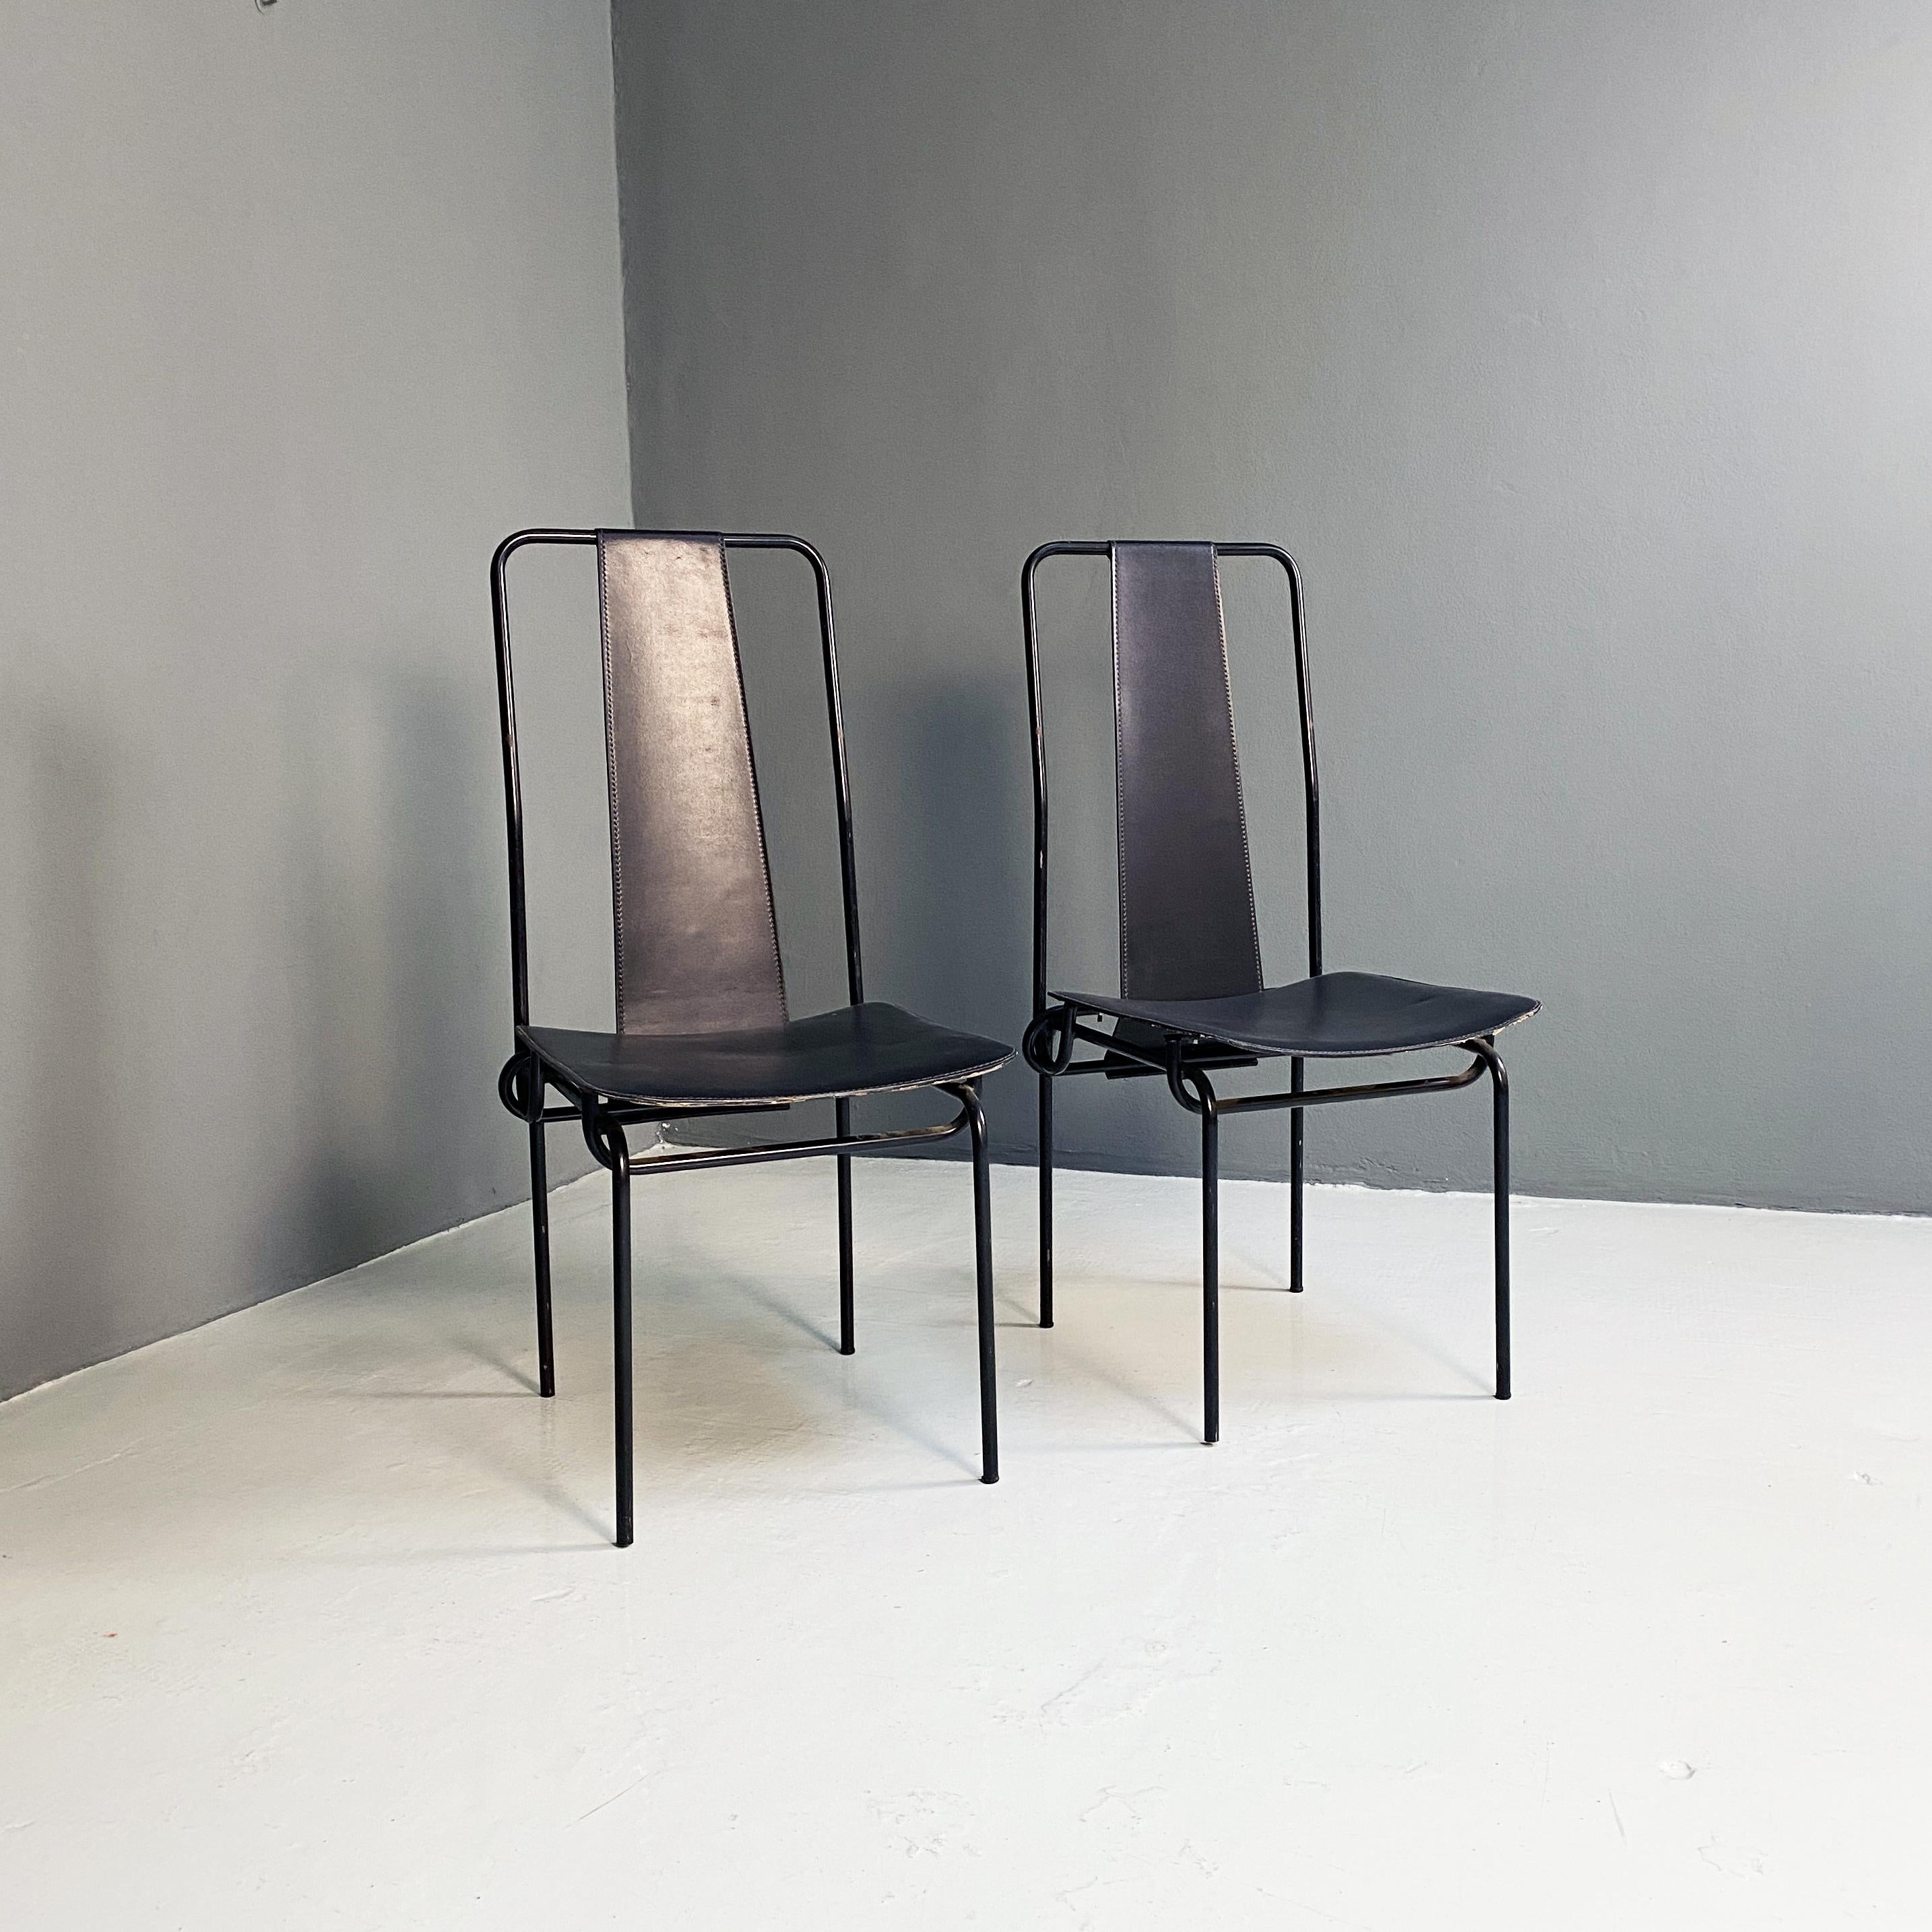 Italian modern Black chairs by Adalberto del Lago for Misura Emme, 1980s
Black chairs in enamelled metal rod, with seat and high back in black leather by Adalberto del Lago for Misura Emme, 1980s.
Very good condition
Measures in cm 52x43x98h
This